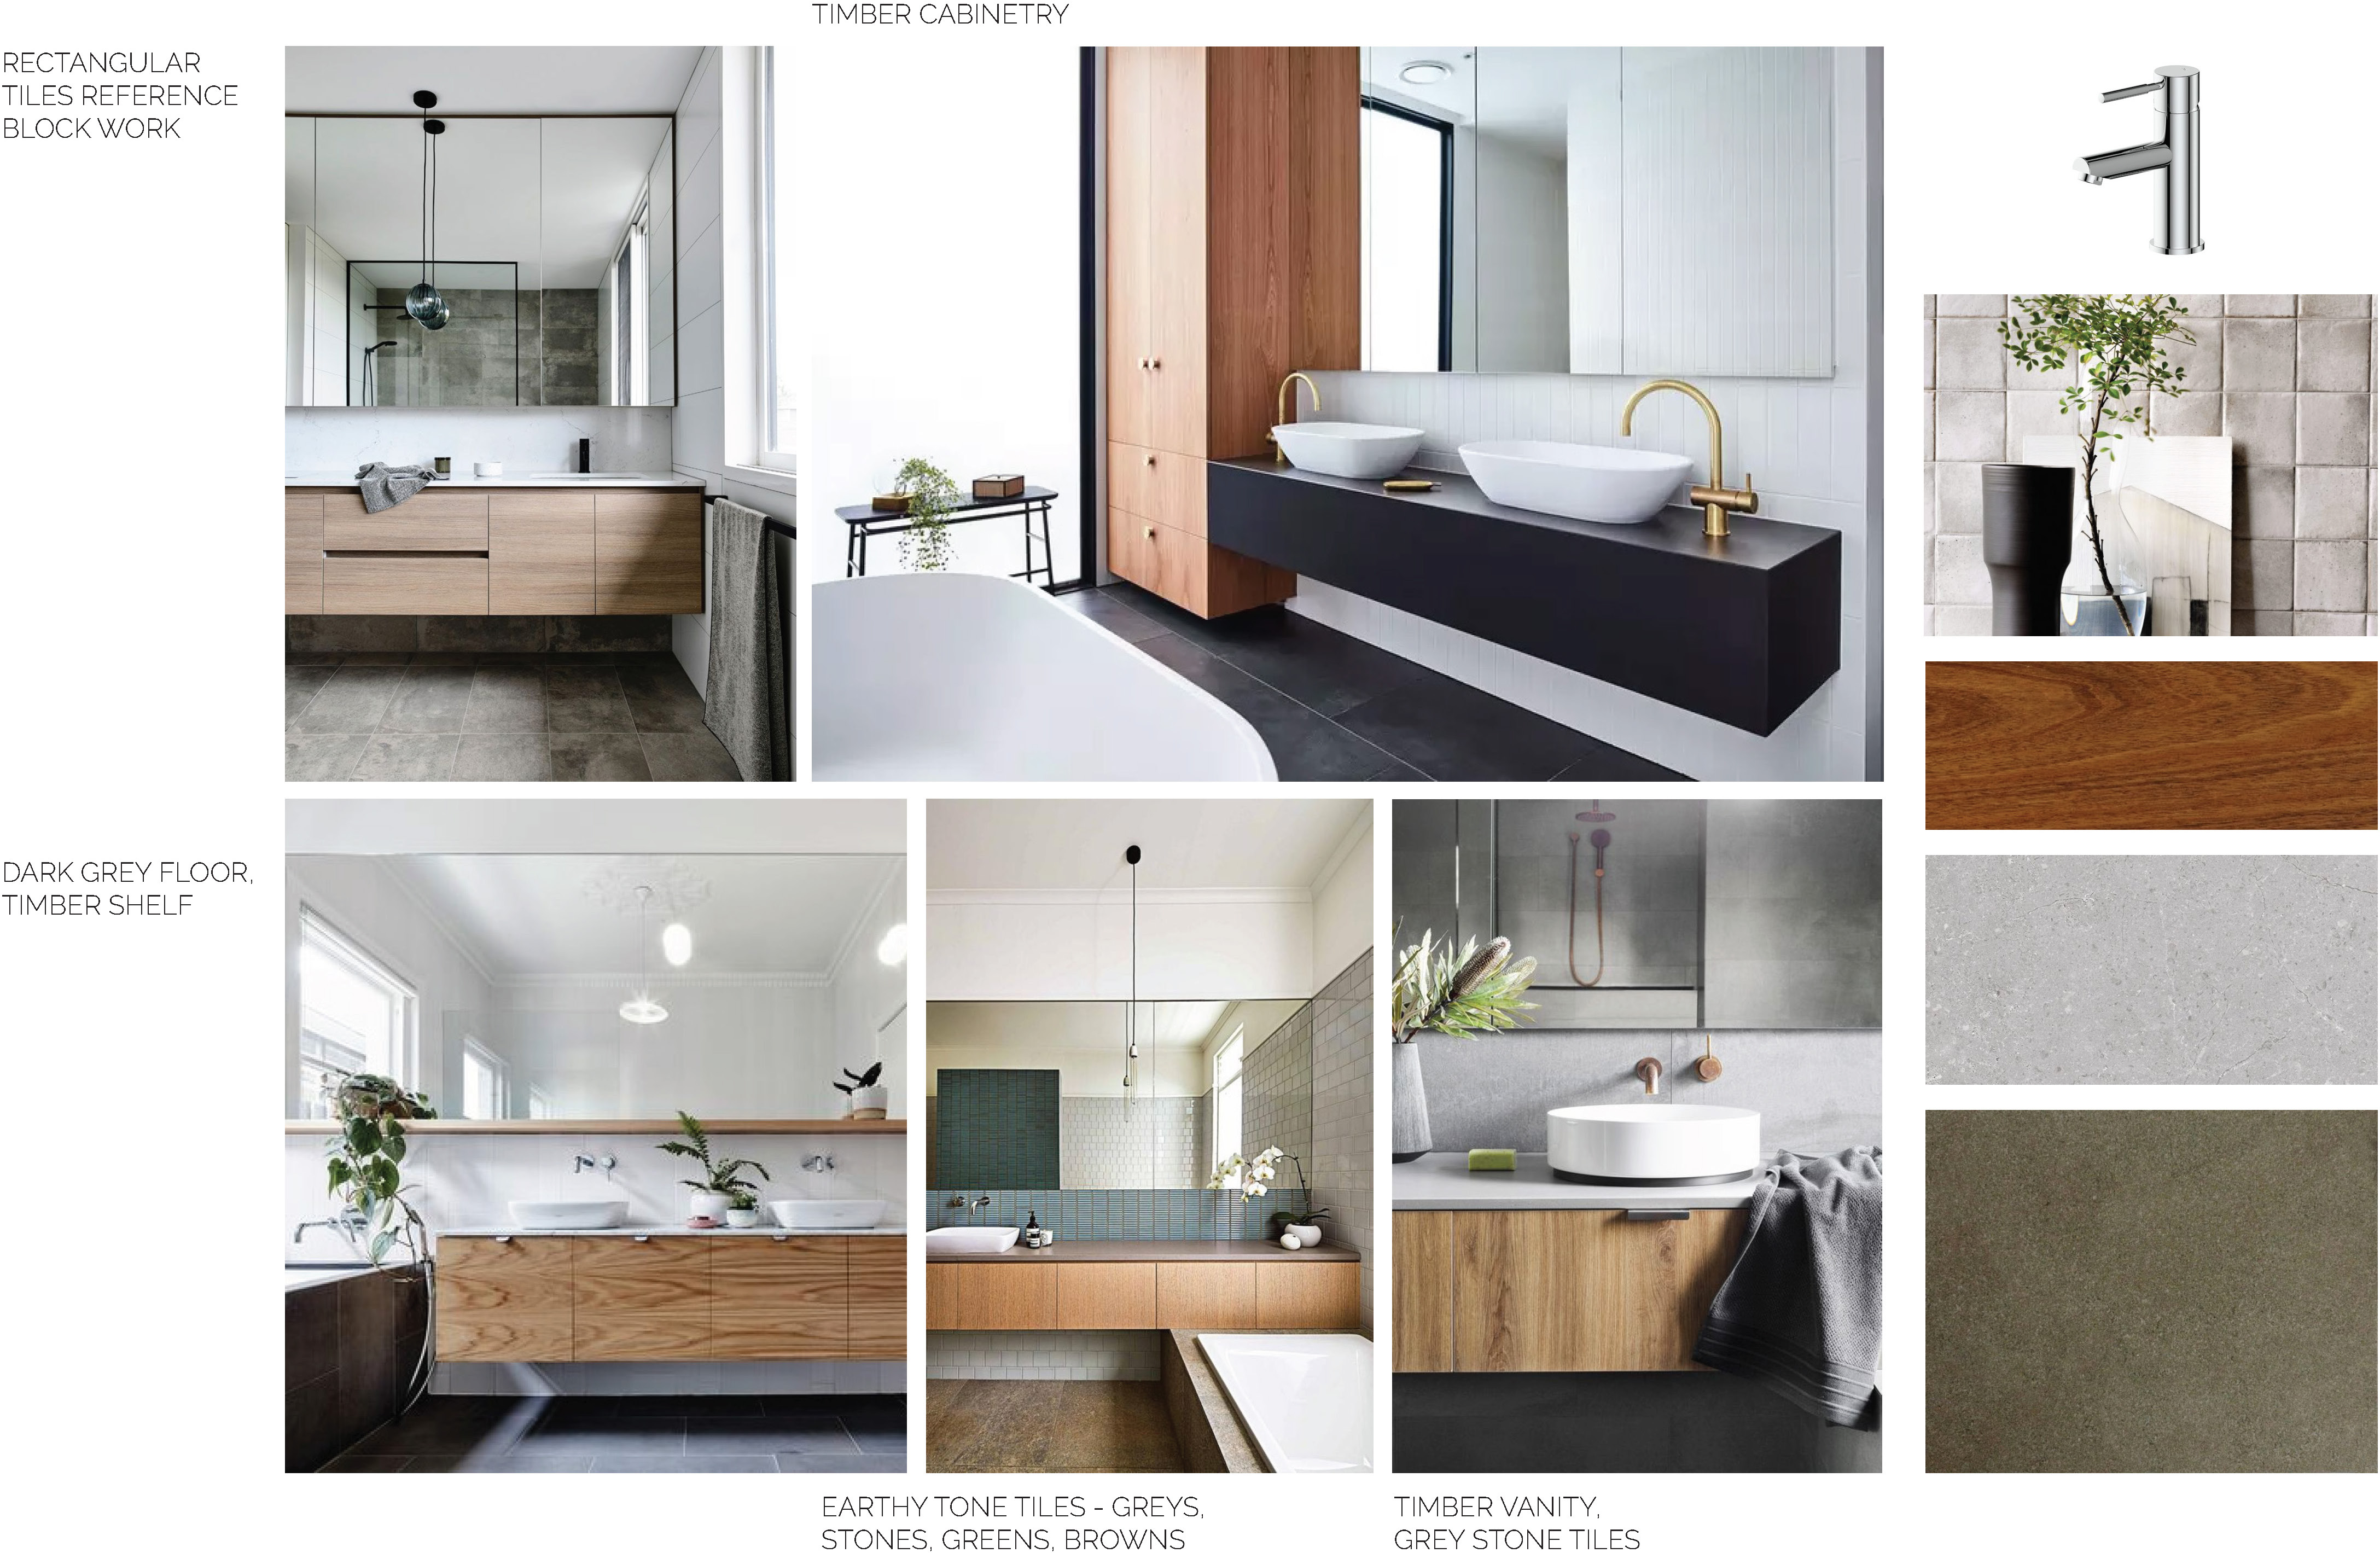 King valley ensuite concept